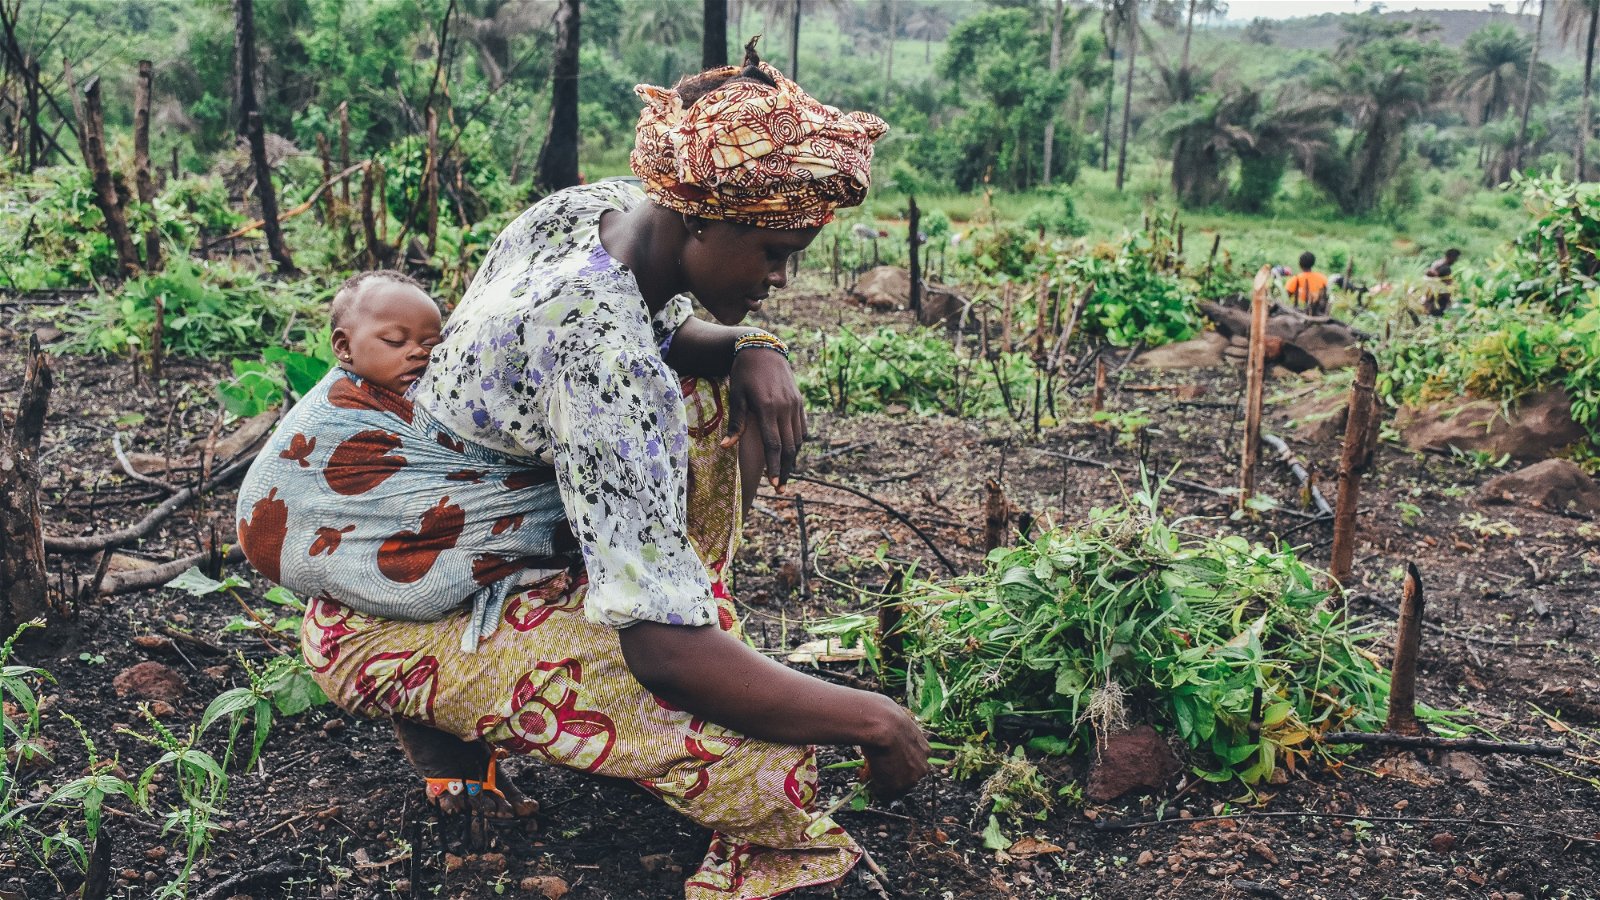 To achieve an inclusive, food-secure and sustainable future for all: move women in agribusinesses up the food security and climate action agendas